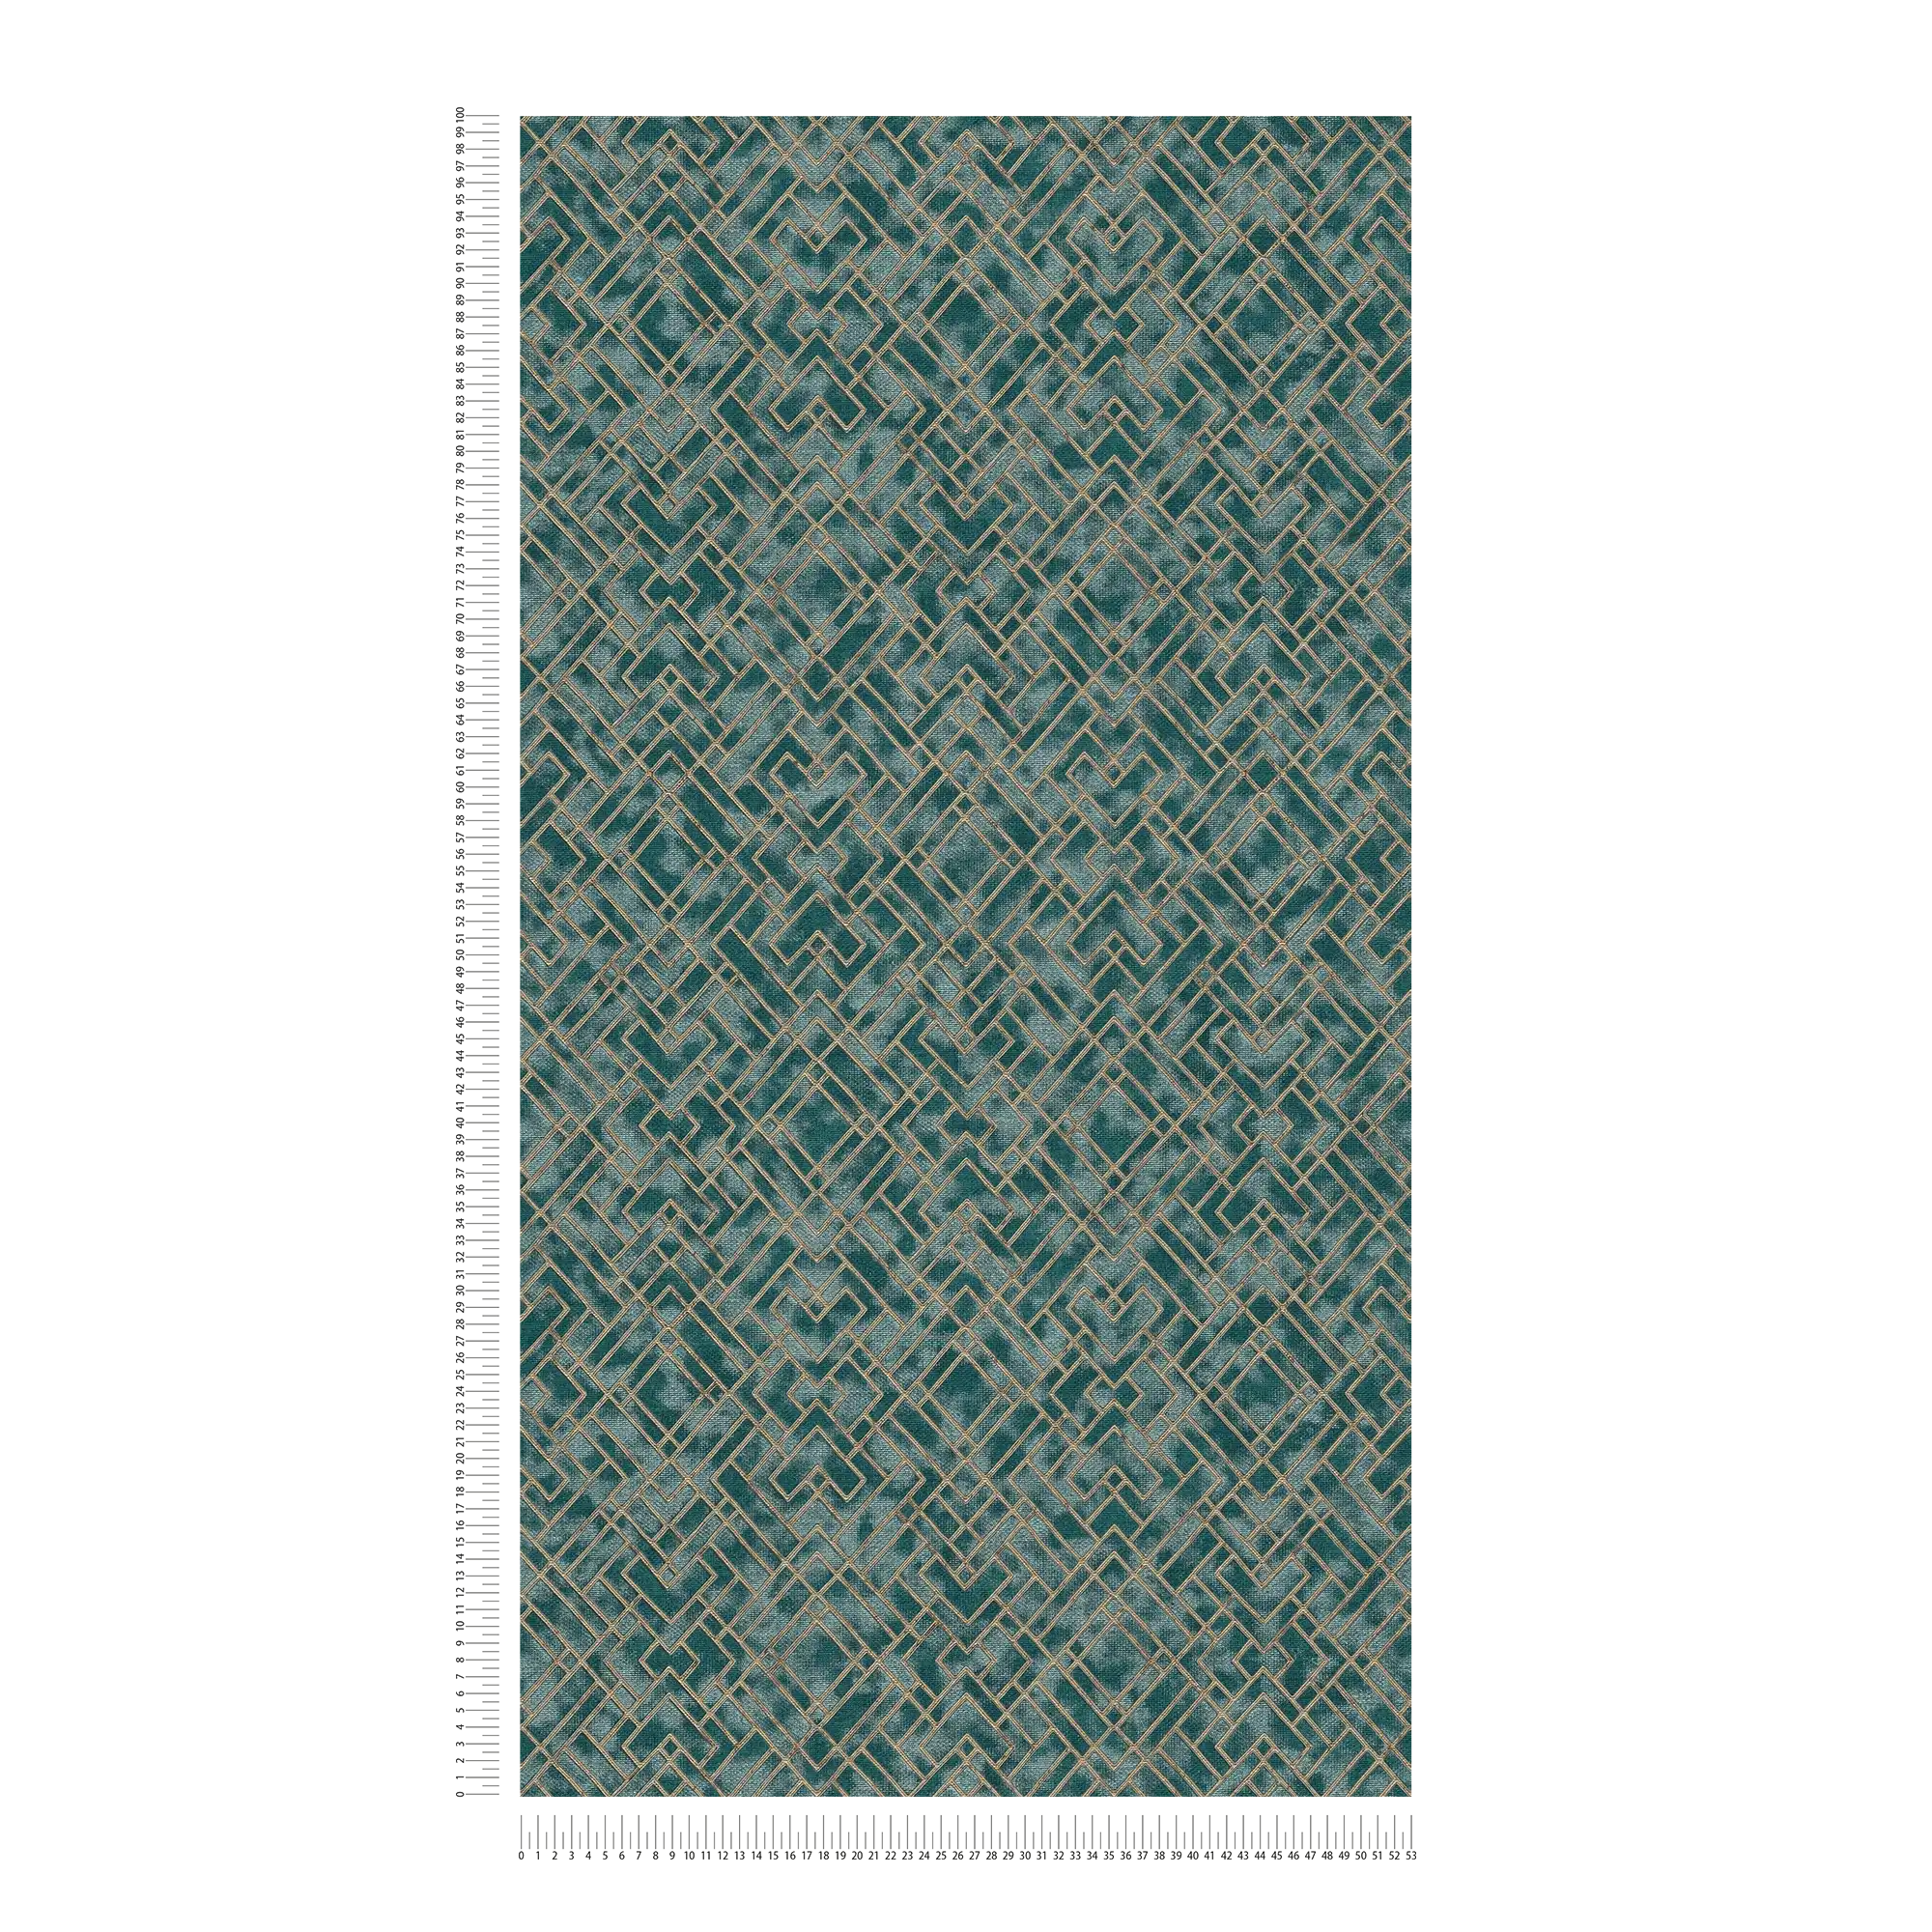             Art deco wallpaper with silver graphic pattern - green
        